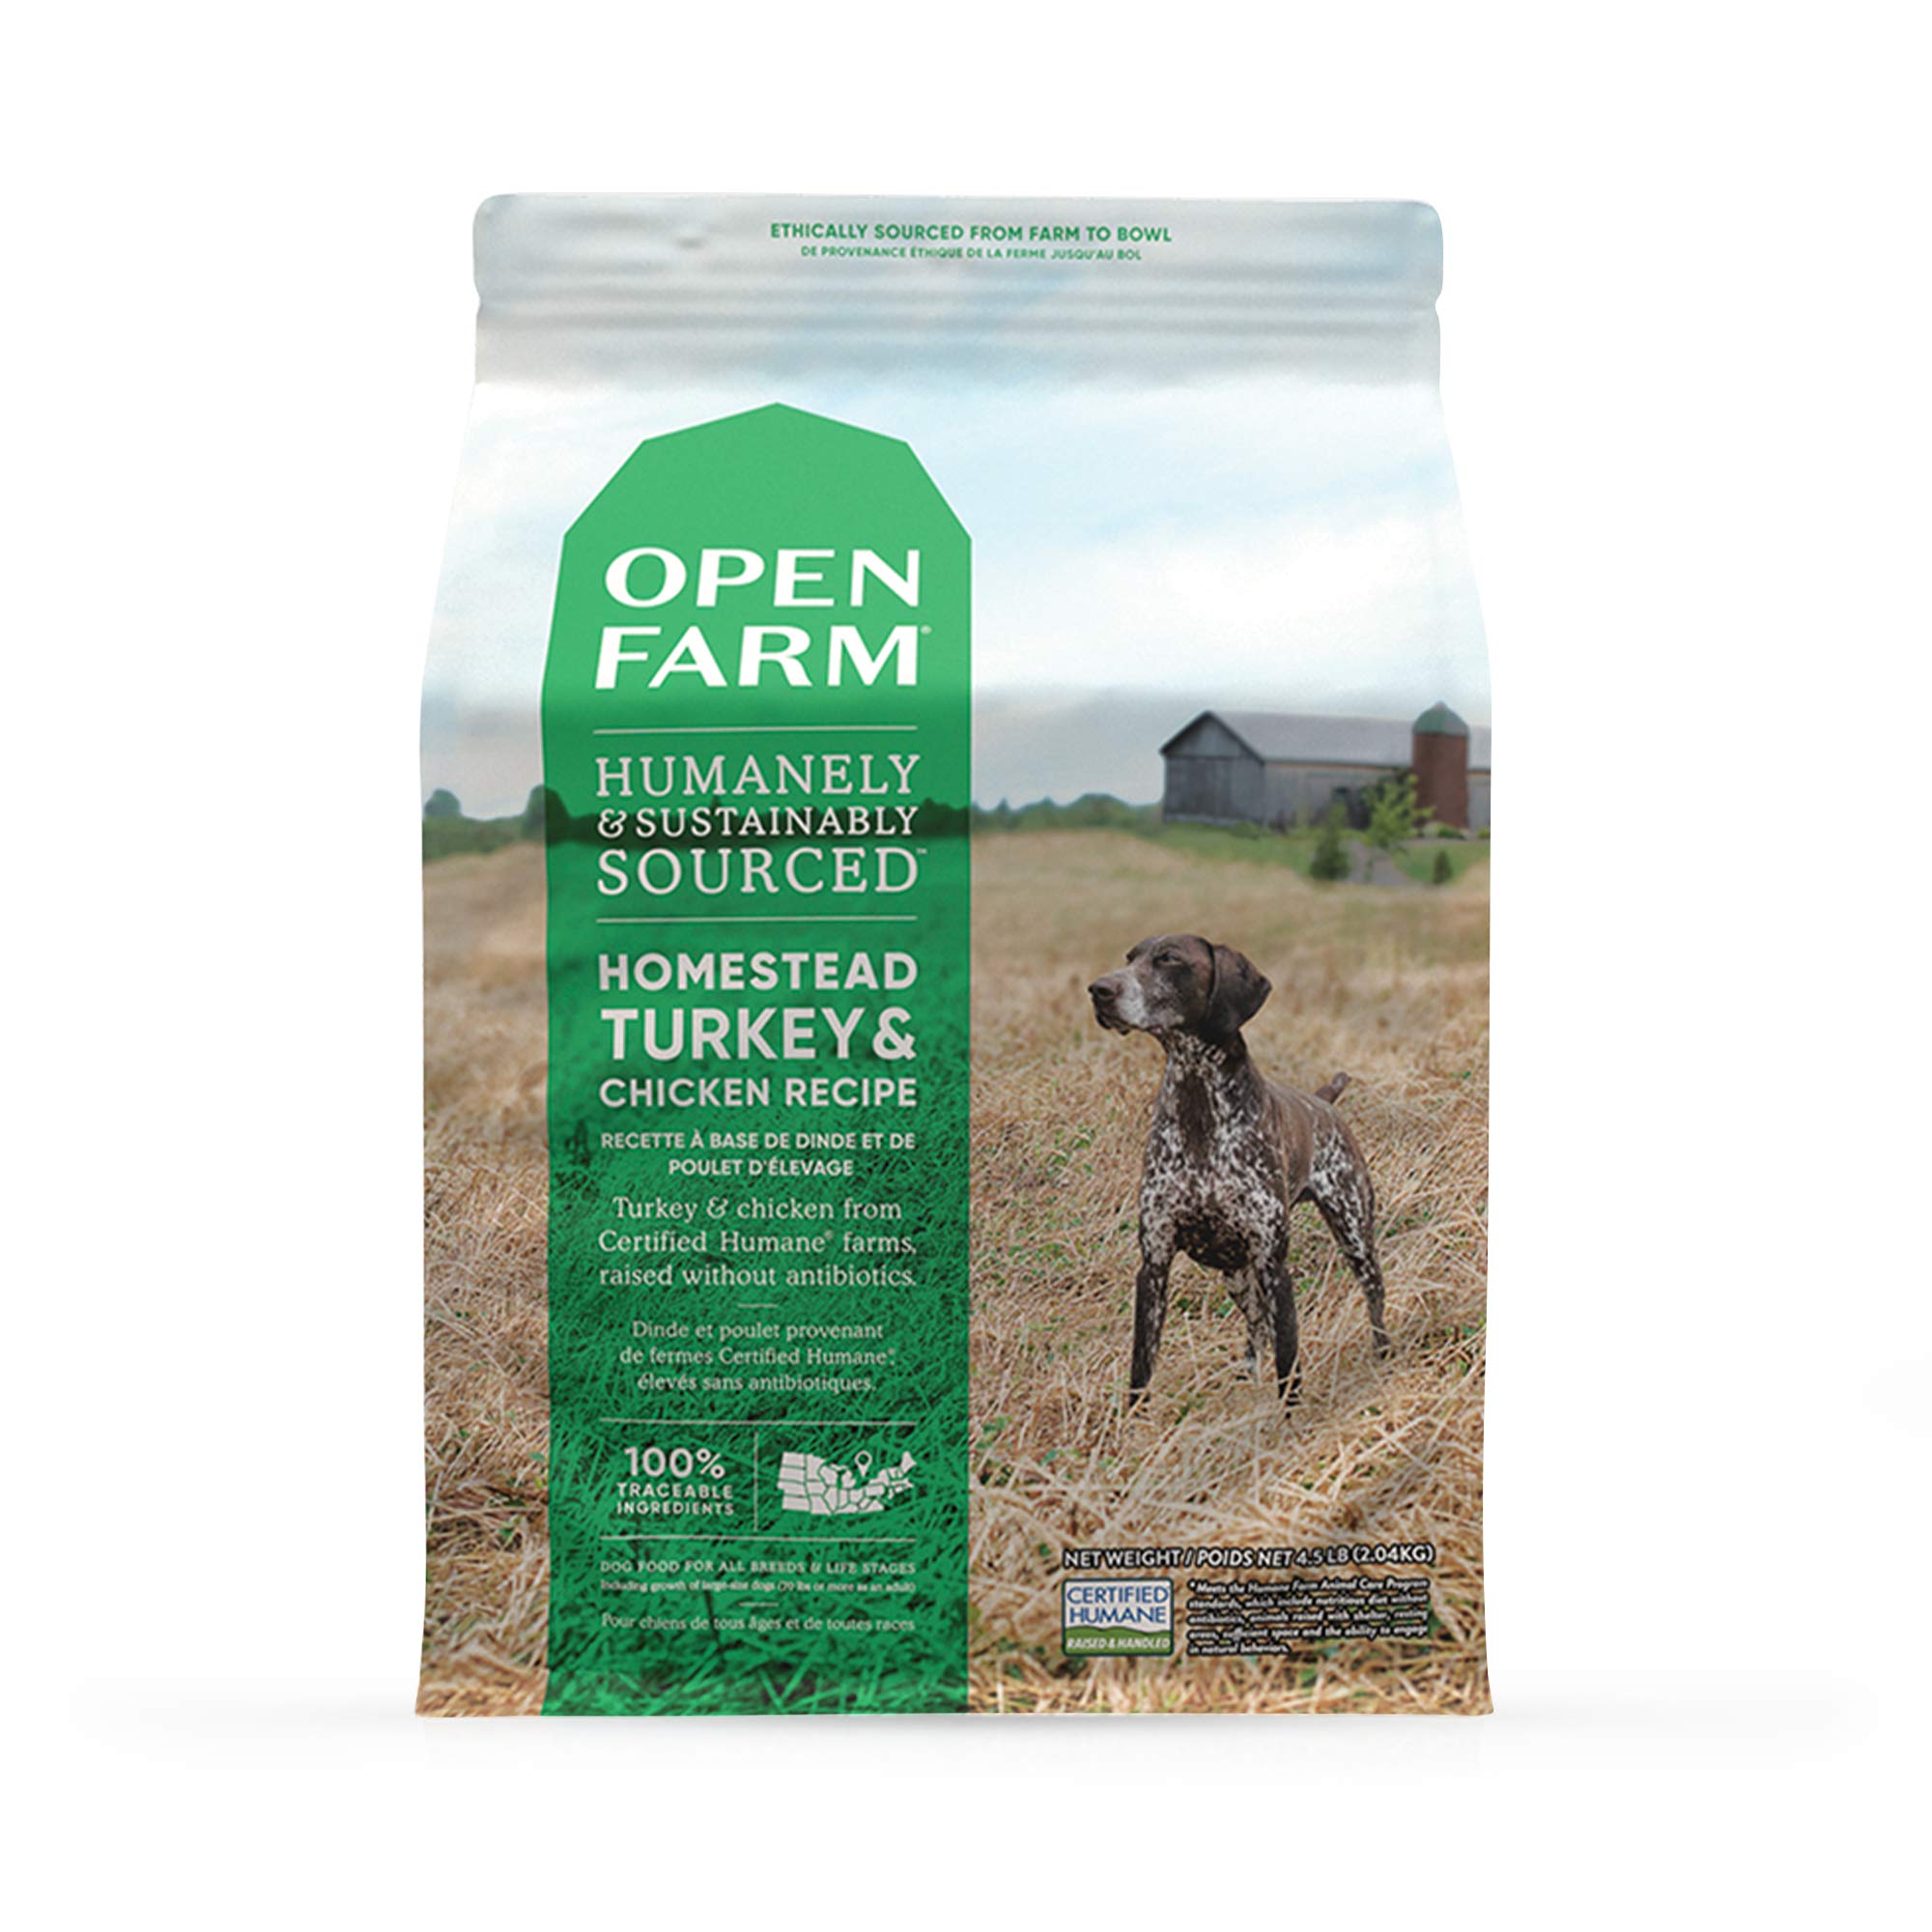 Amazon.com: Open Farm Homestead Turkey and Chicken Grain-Free Dry Dog Food, 100% Certified Humane Poultry Recipe with Non-GMO Superfoods and No Artificial Flavors or Preservatives, 4.5 lbs : Pet Supplies